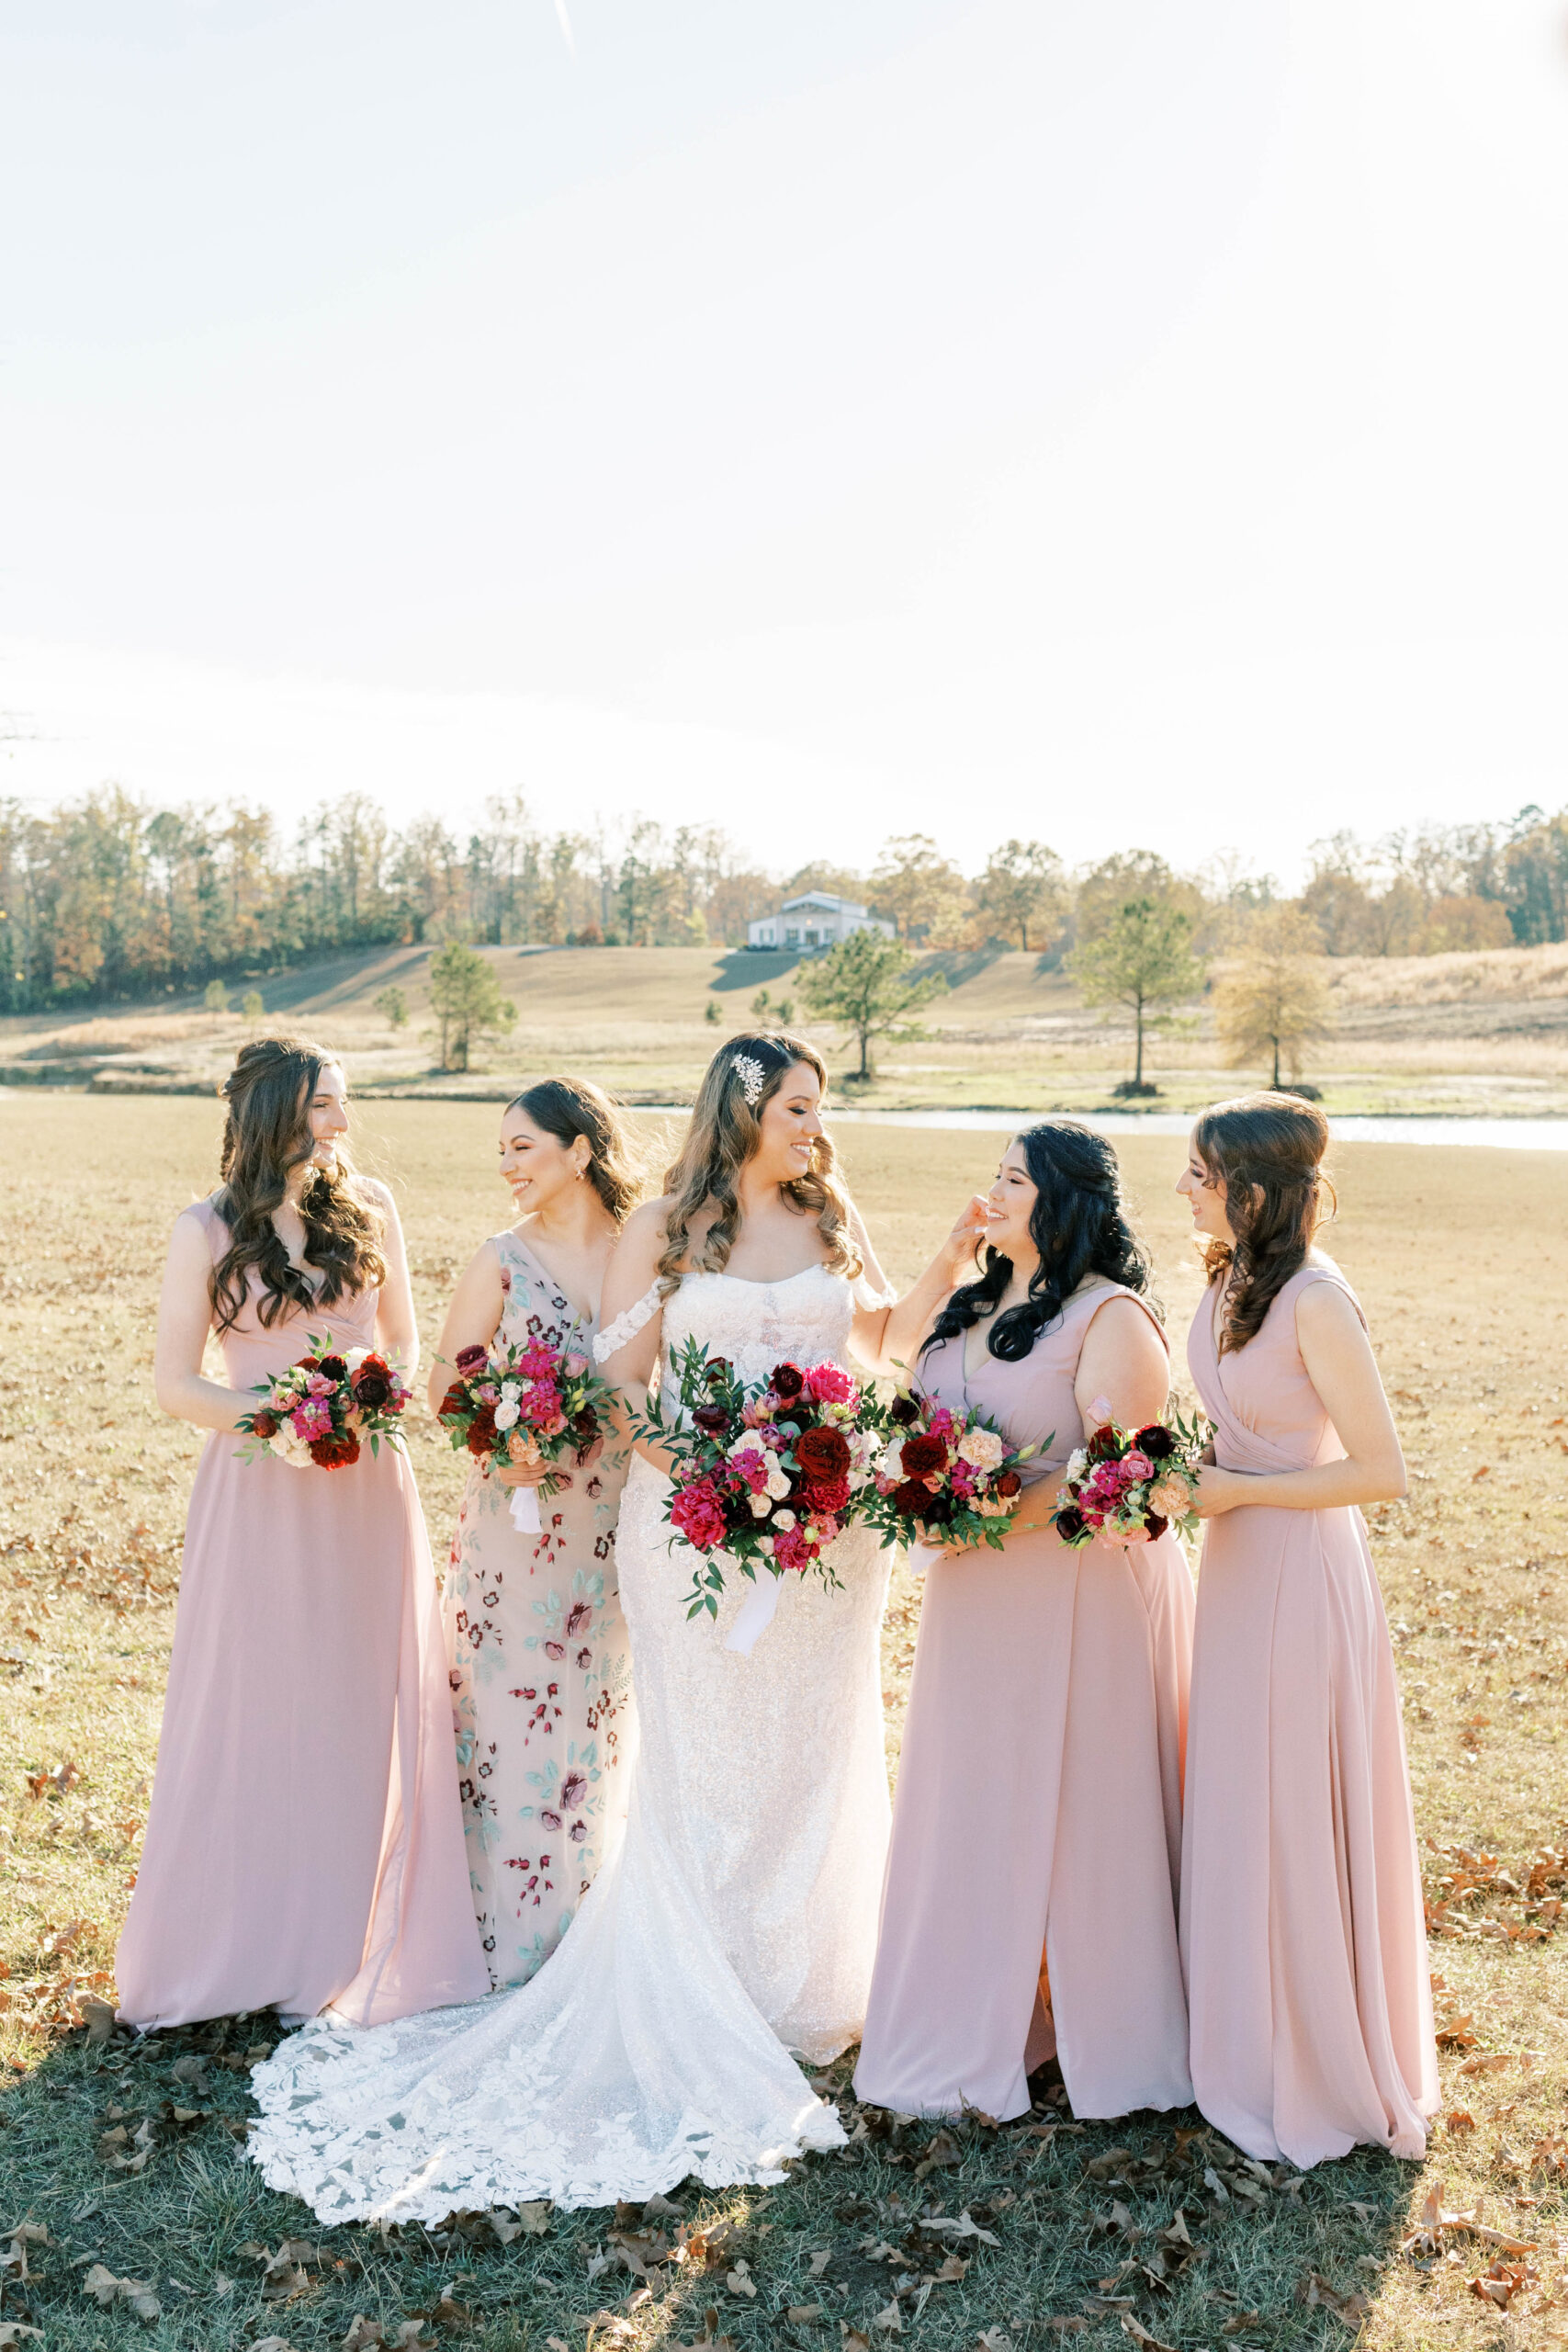 Taking Care of your Bridesmaids